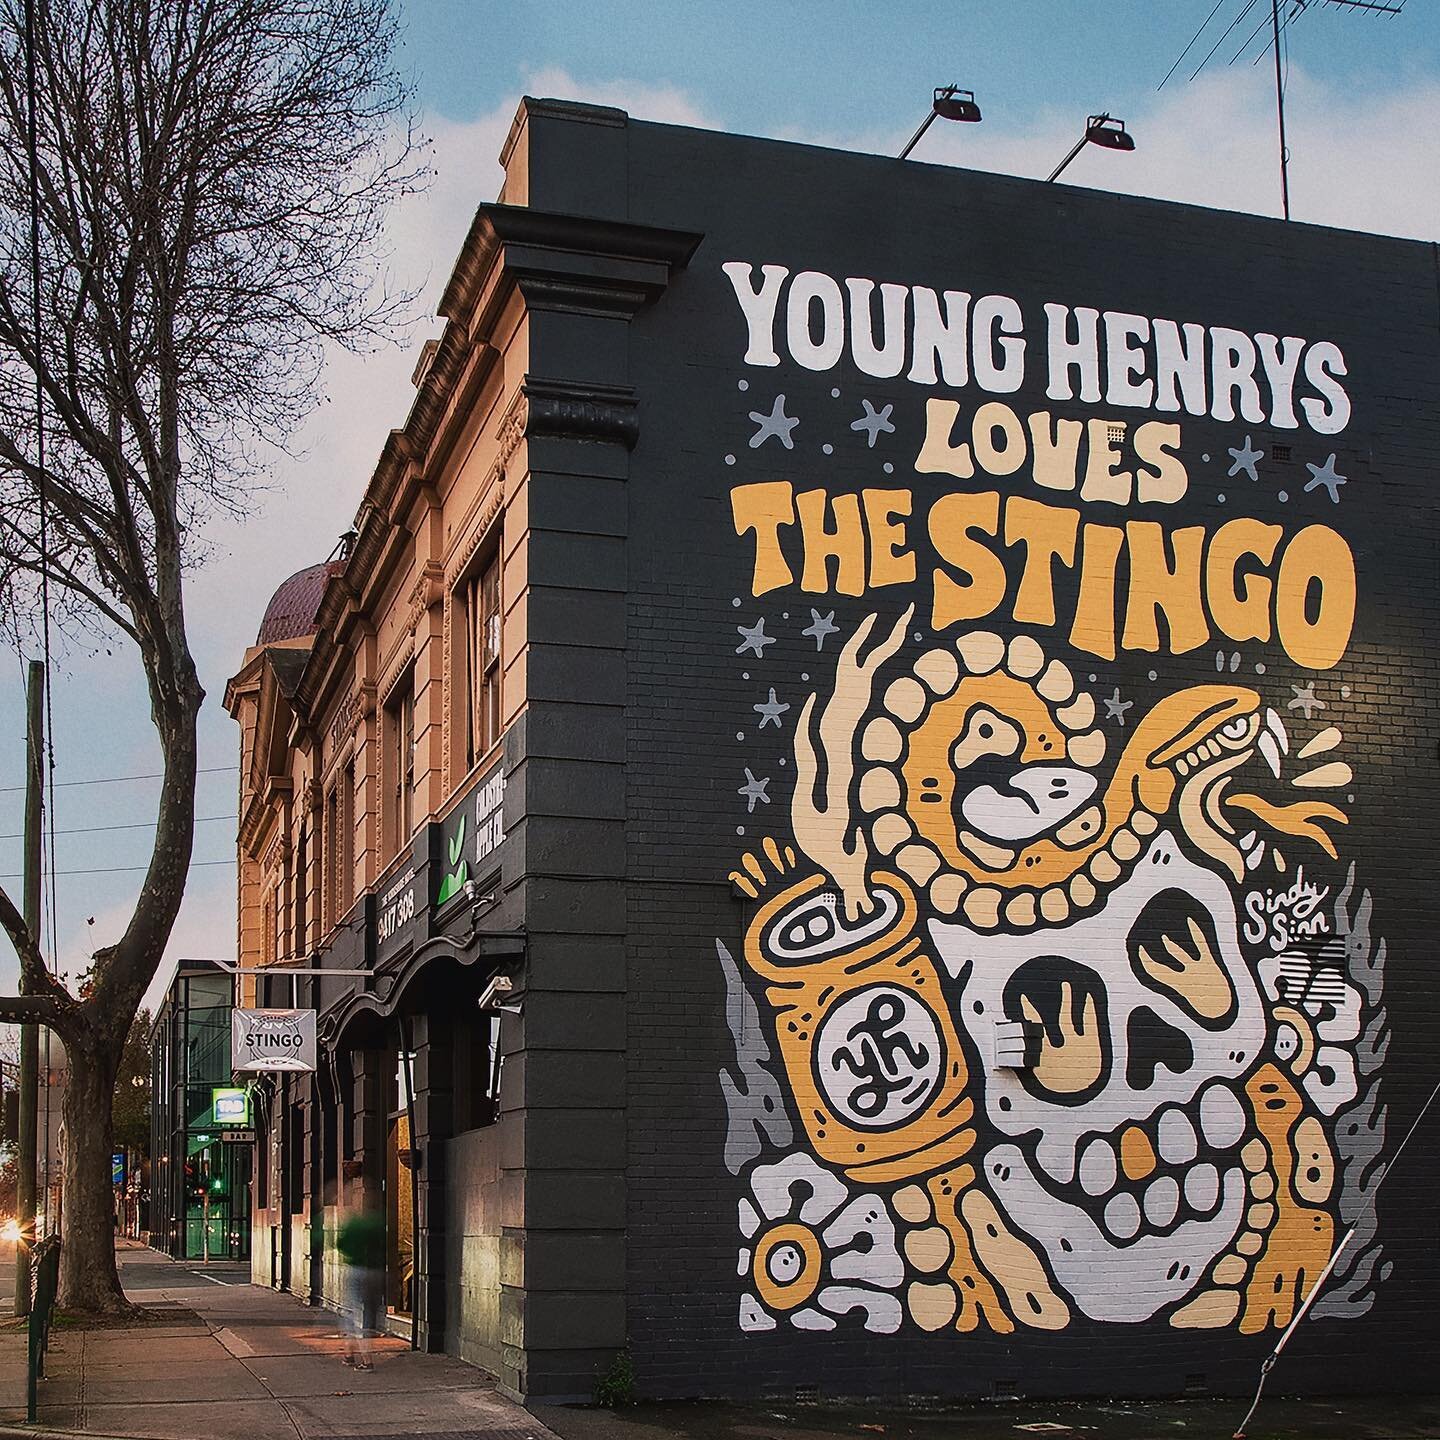 Some big new mural artwork up at @the.stingo in Abbotsford Melbourne. This one has a sexy view straight down Hoddle Street. Extremely proud of this postcard series we&rsquo;ve been working on together. Big and bold!
If you&rsquo;re local, jump into T